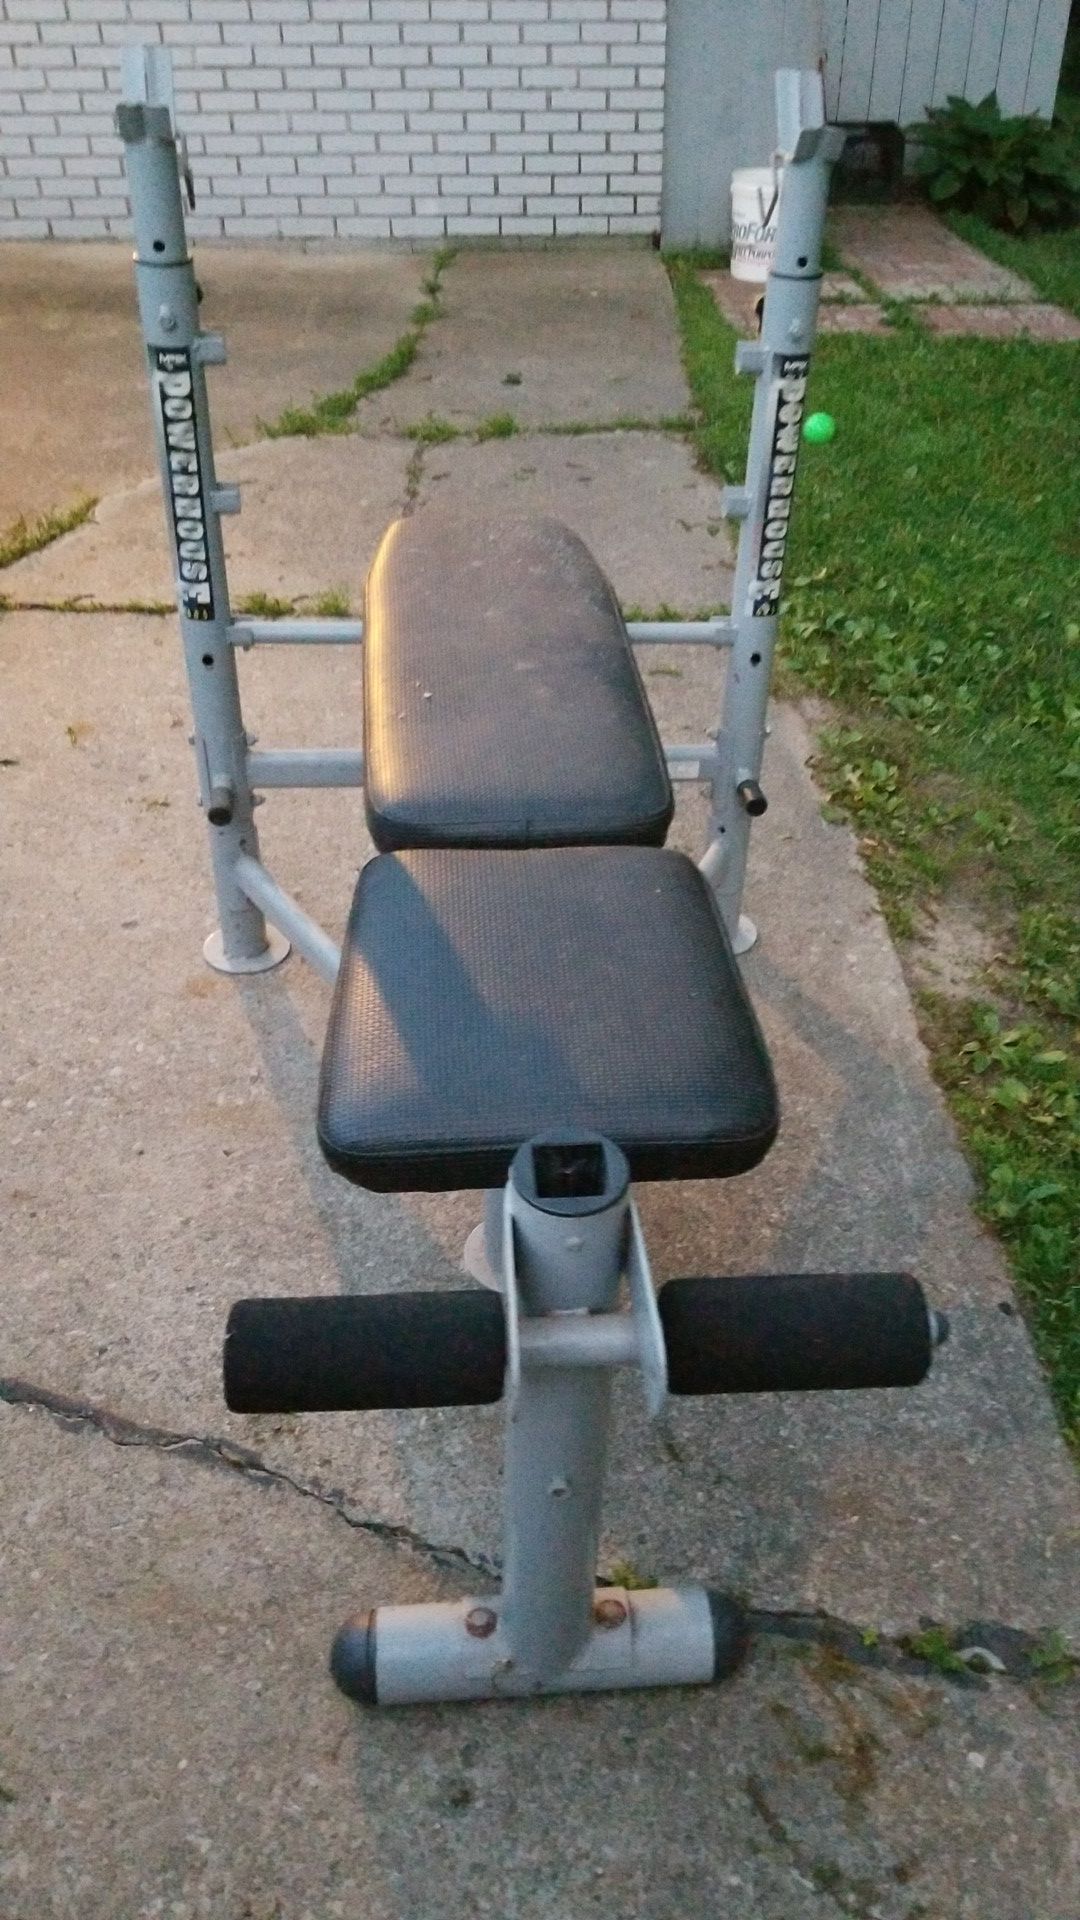 Impex powerhouse weight bench